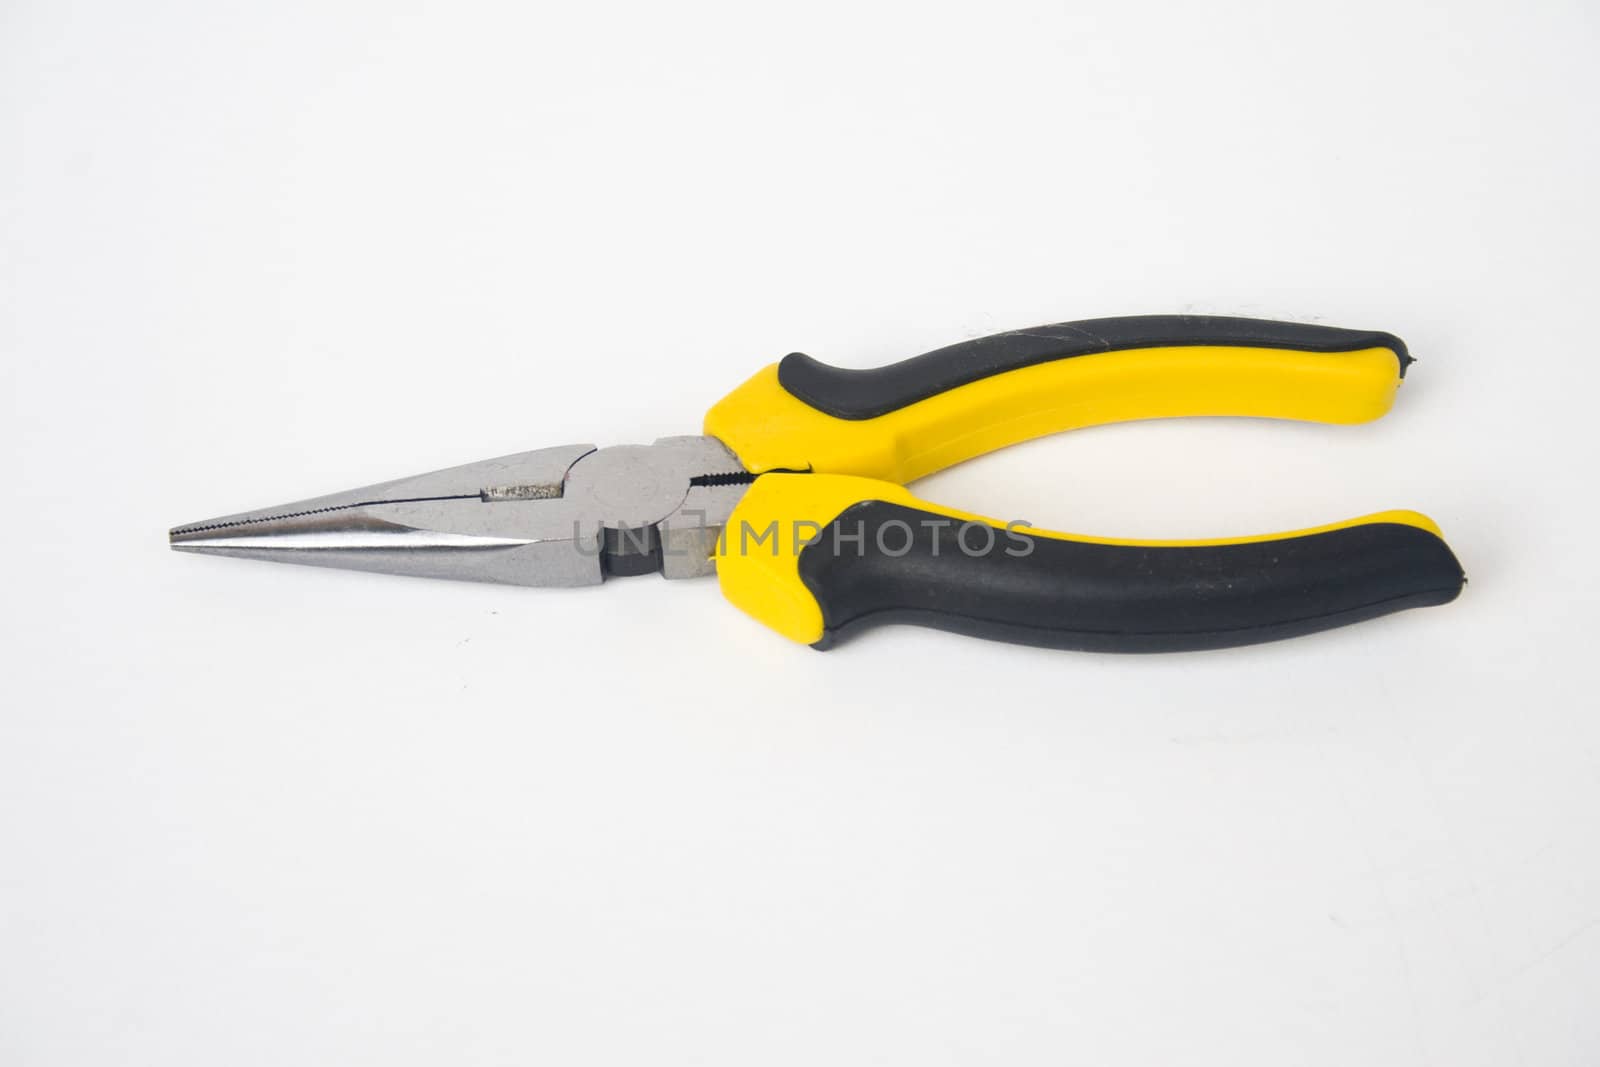 Yellow and black handled needle nose pliers against a white background